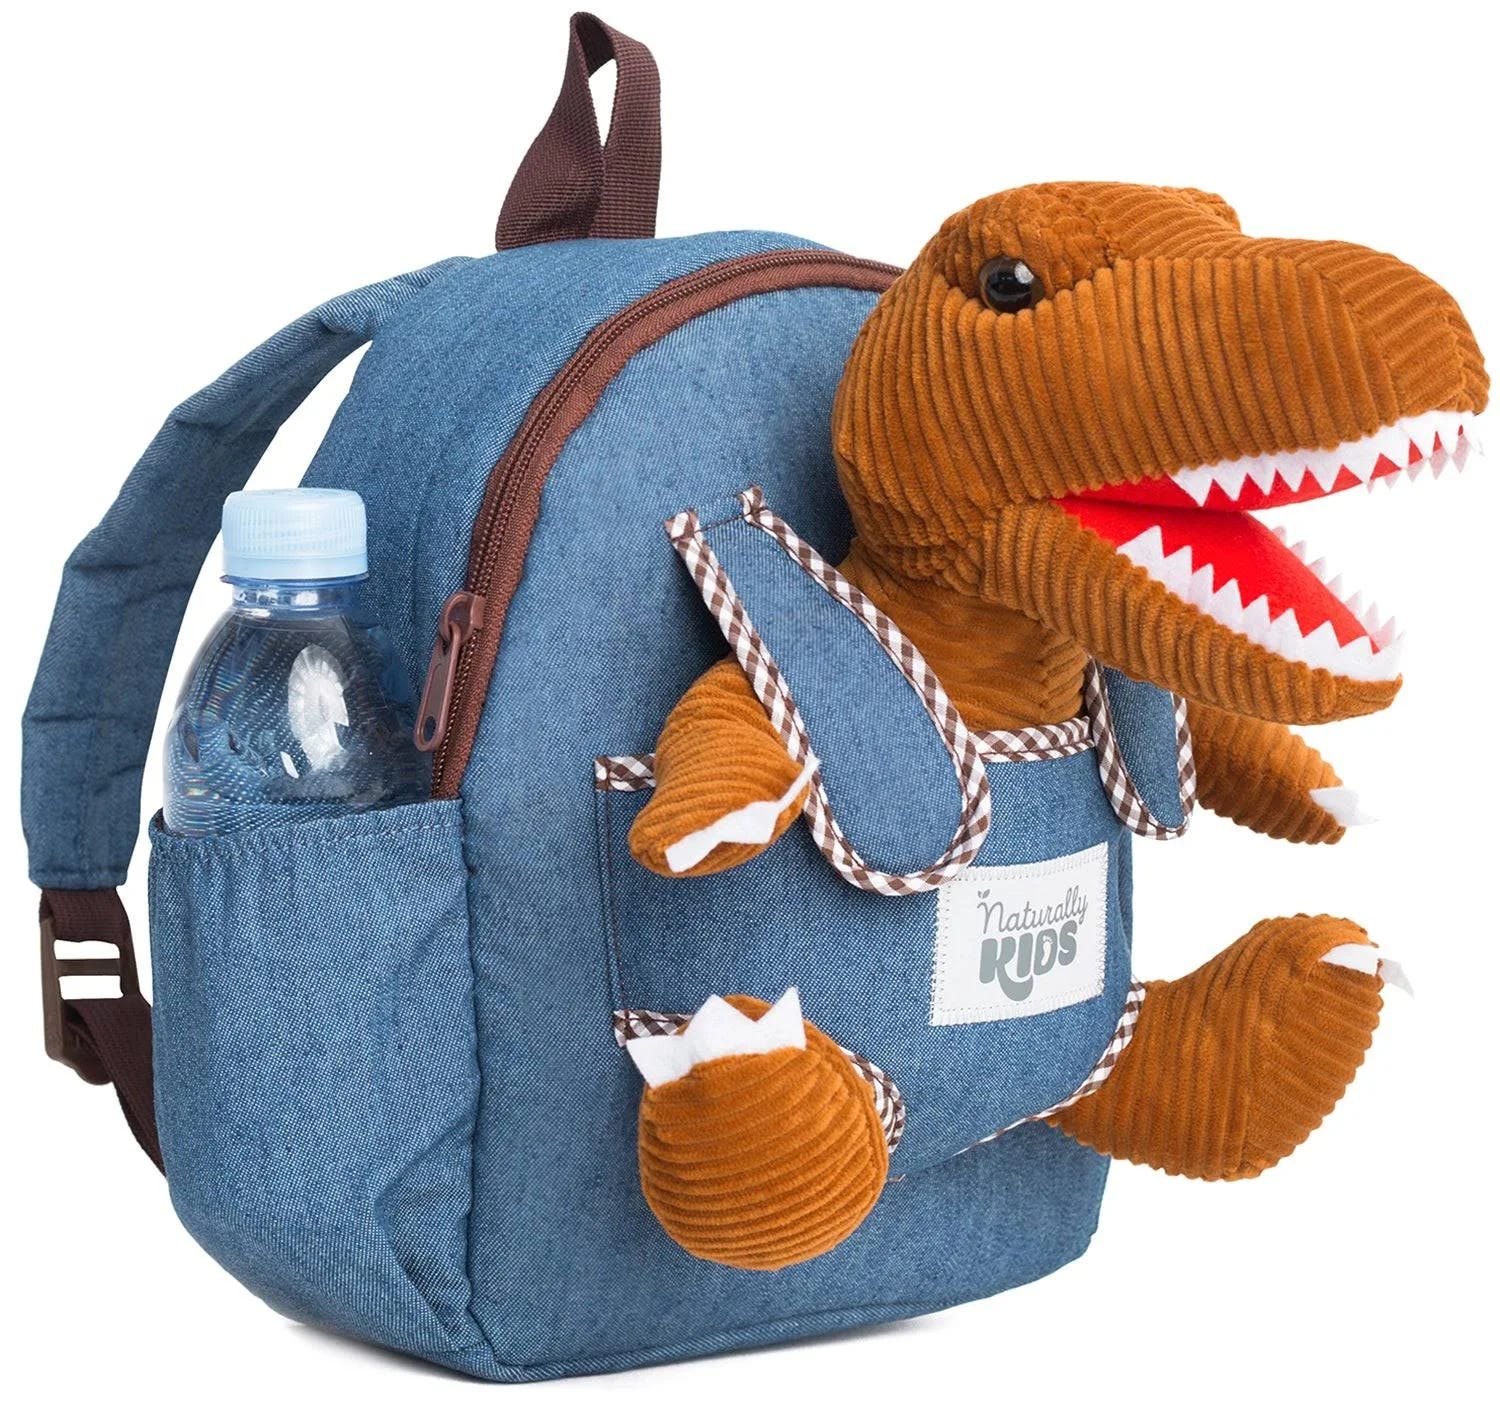 Toddler Dinosaur Backpack with T-Rex Plush Toy | Image